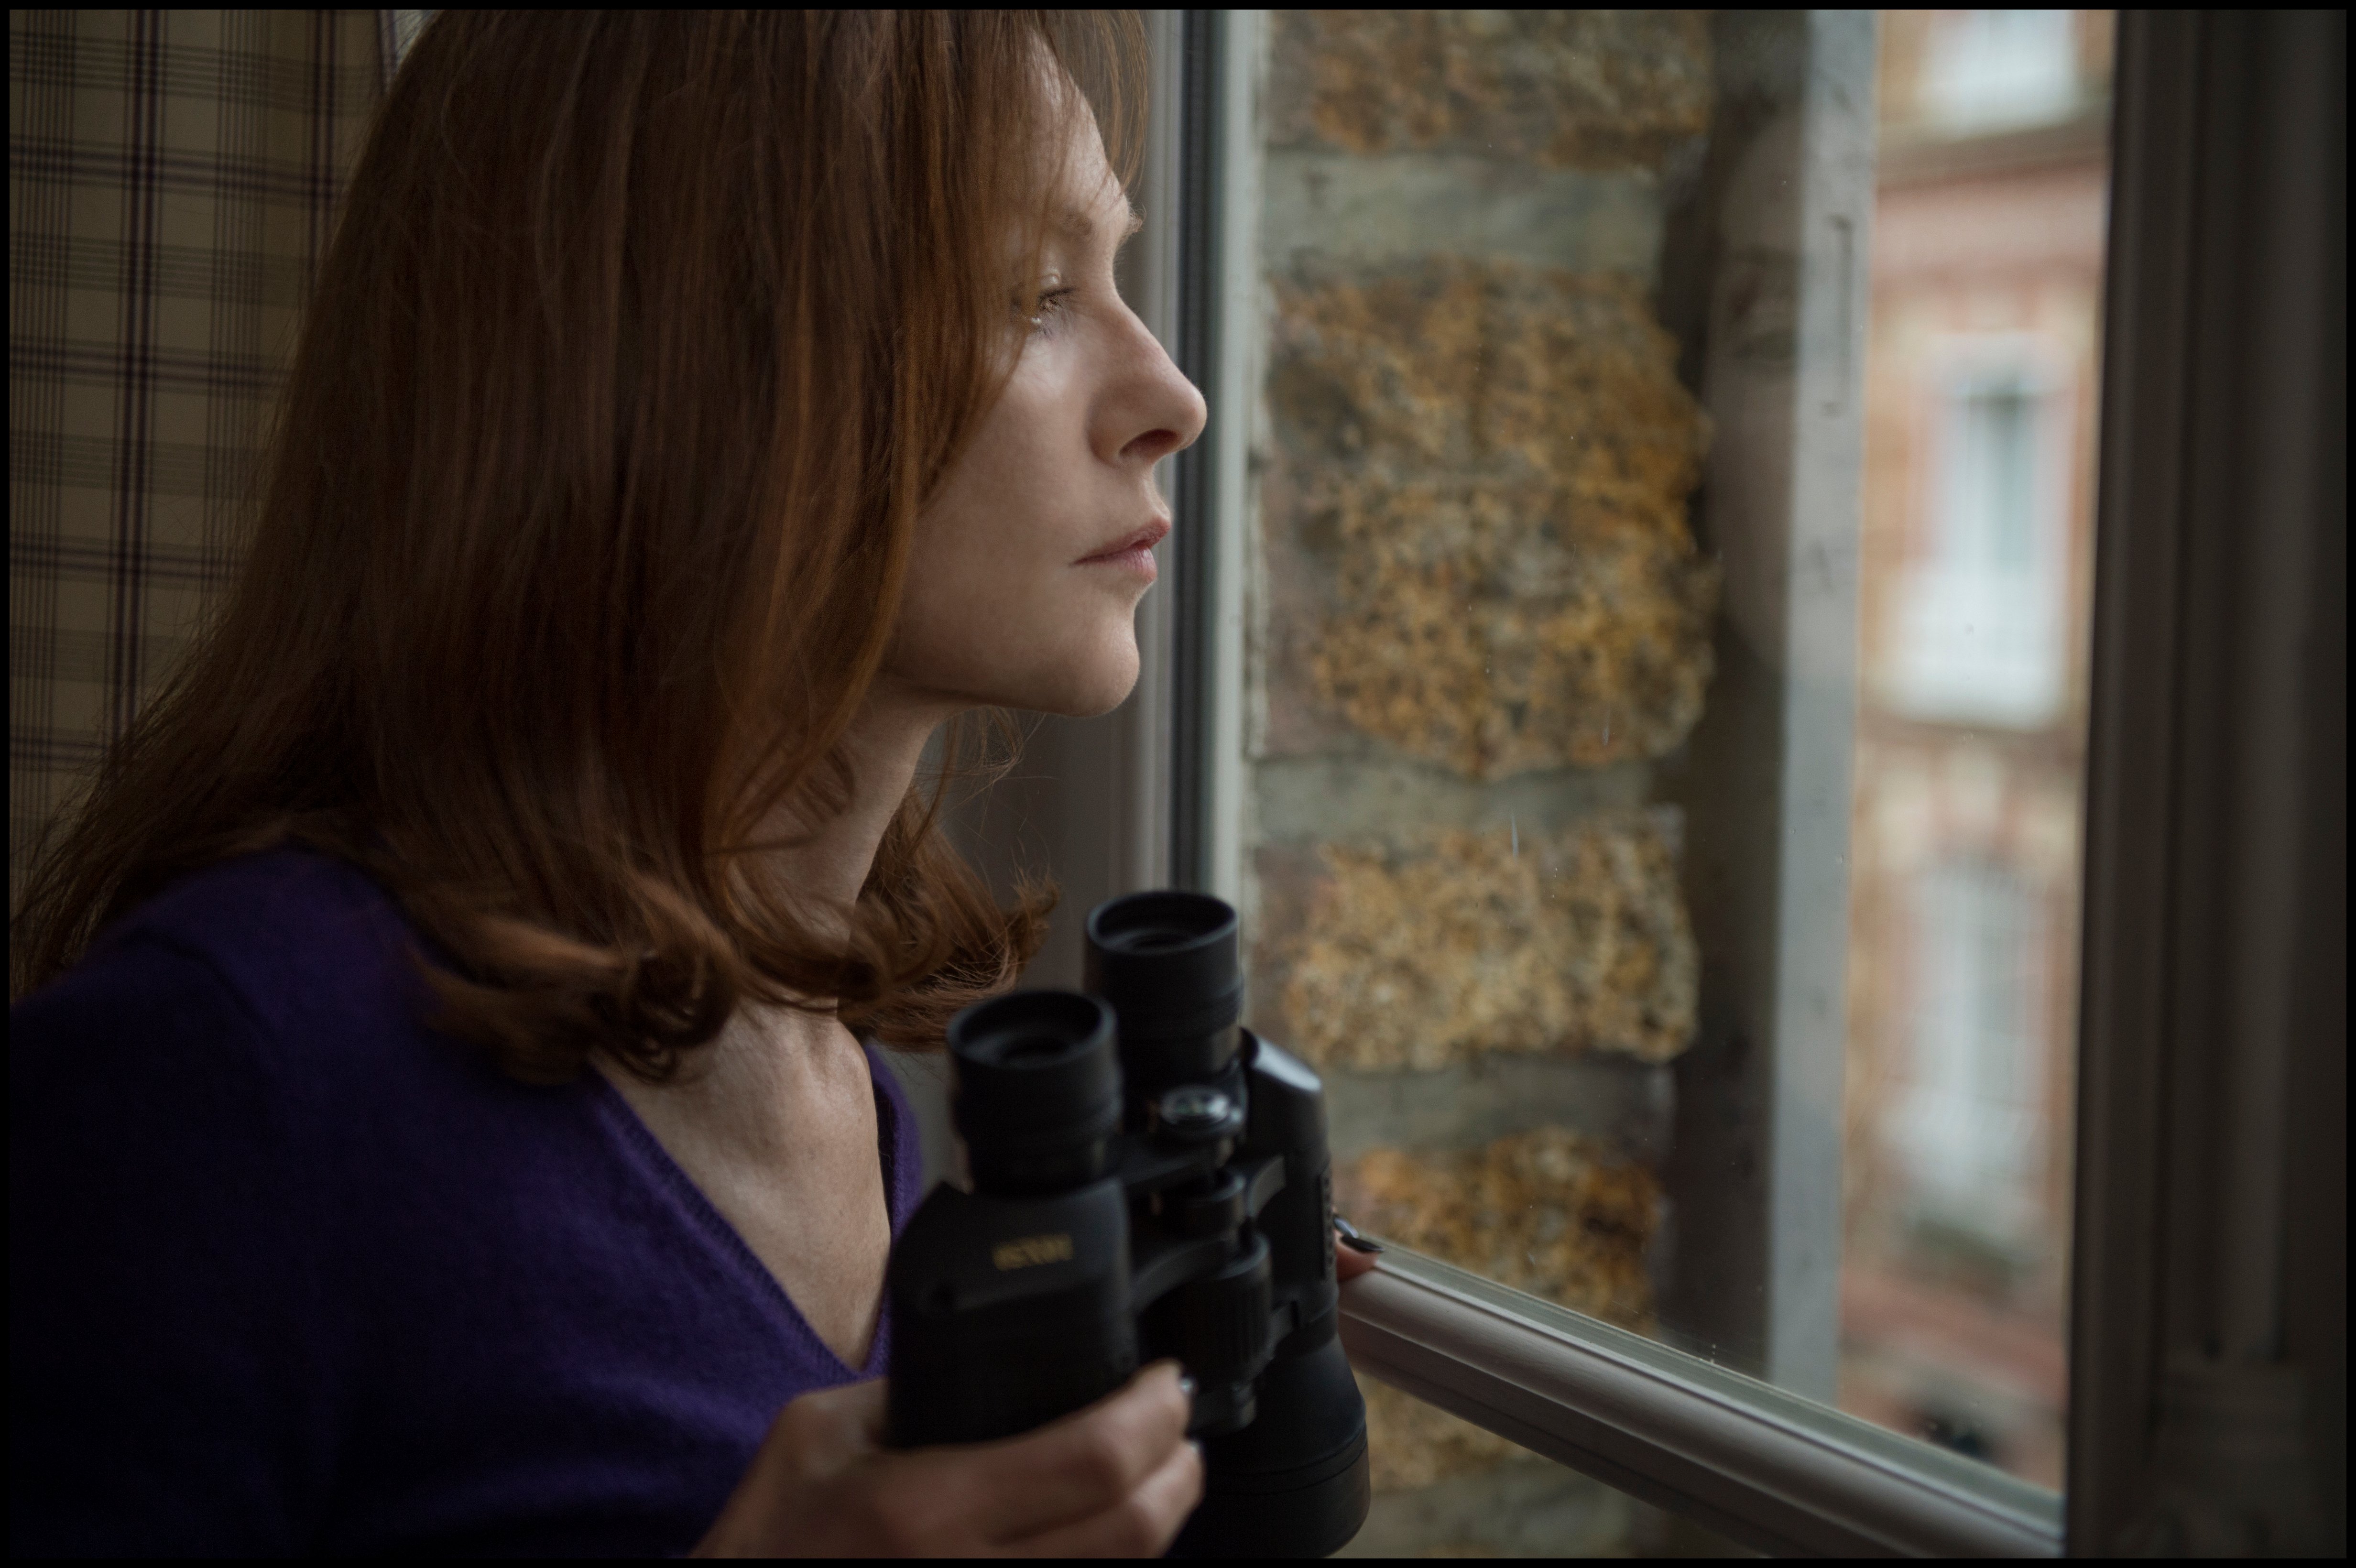 Isabelle Huppert stalks her rapist in "Elle", a film by Paul Verhoeven. (Photo: Guy Ferrandis, SBS Productions and Sony Picture Classics).